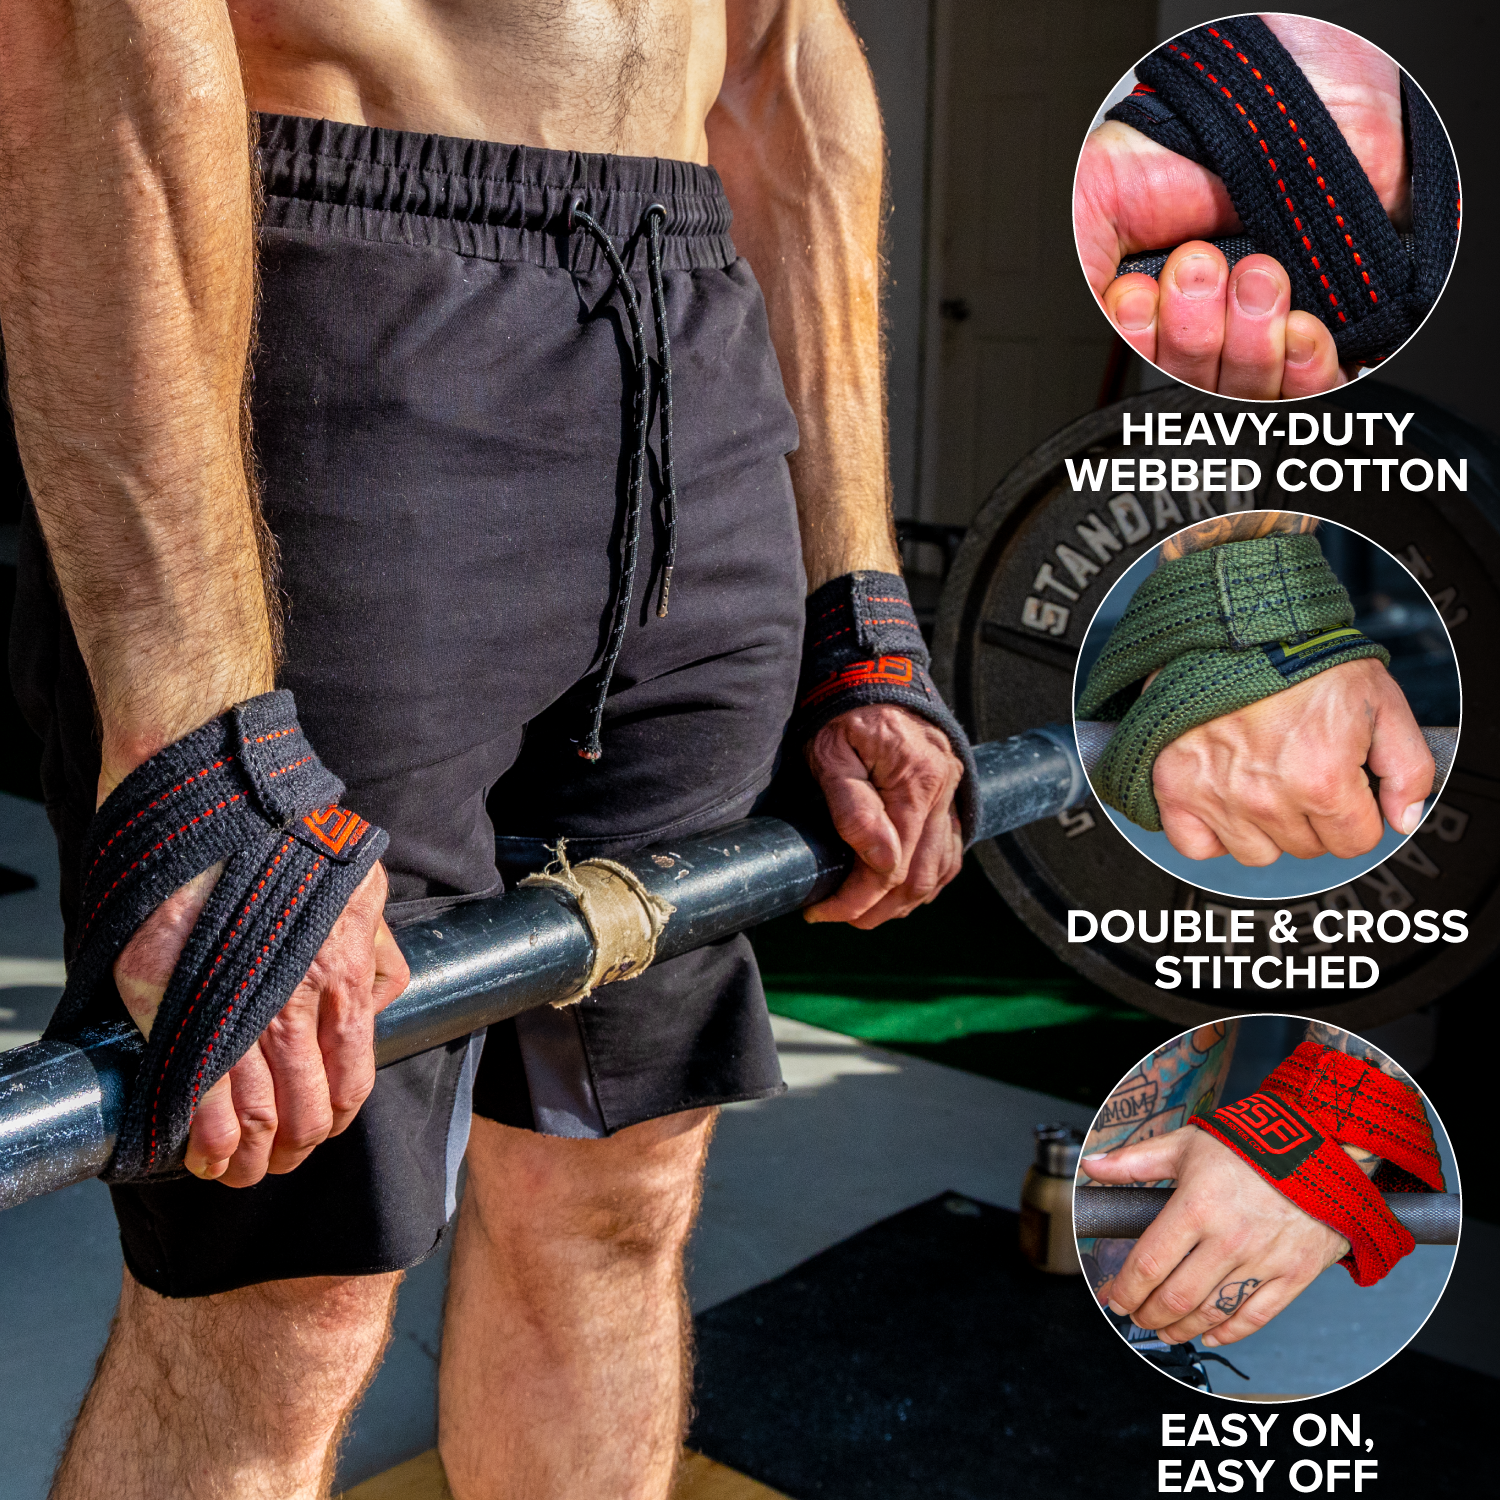 How to Use Lifting Straps for 4 Different Exercises - Steel